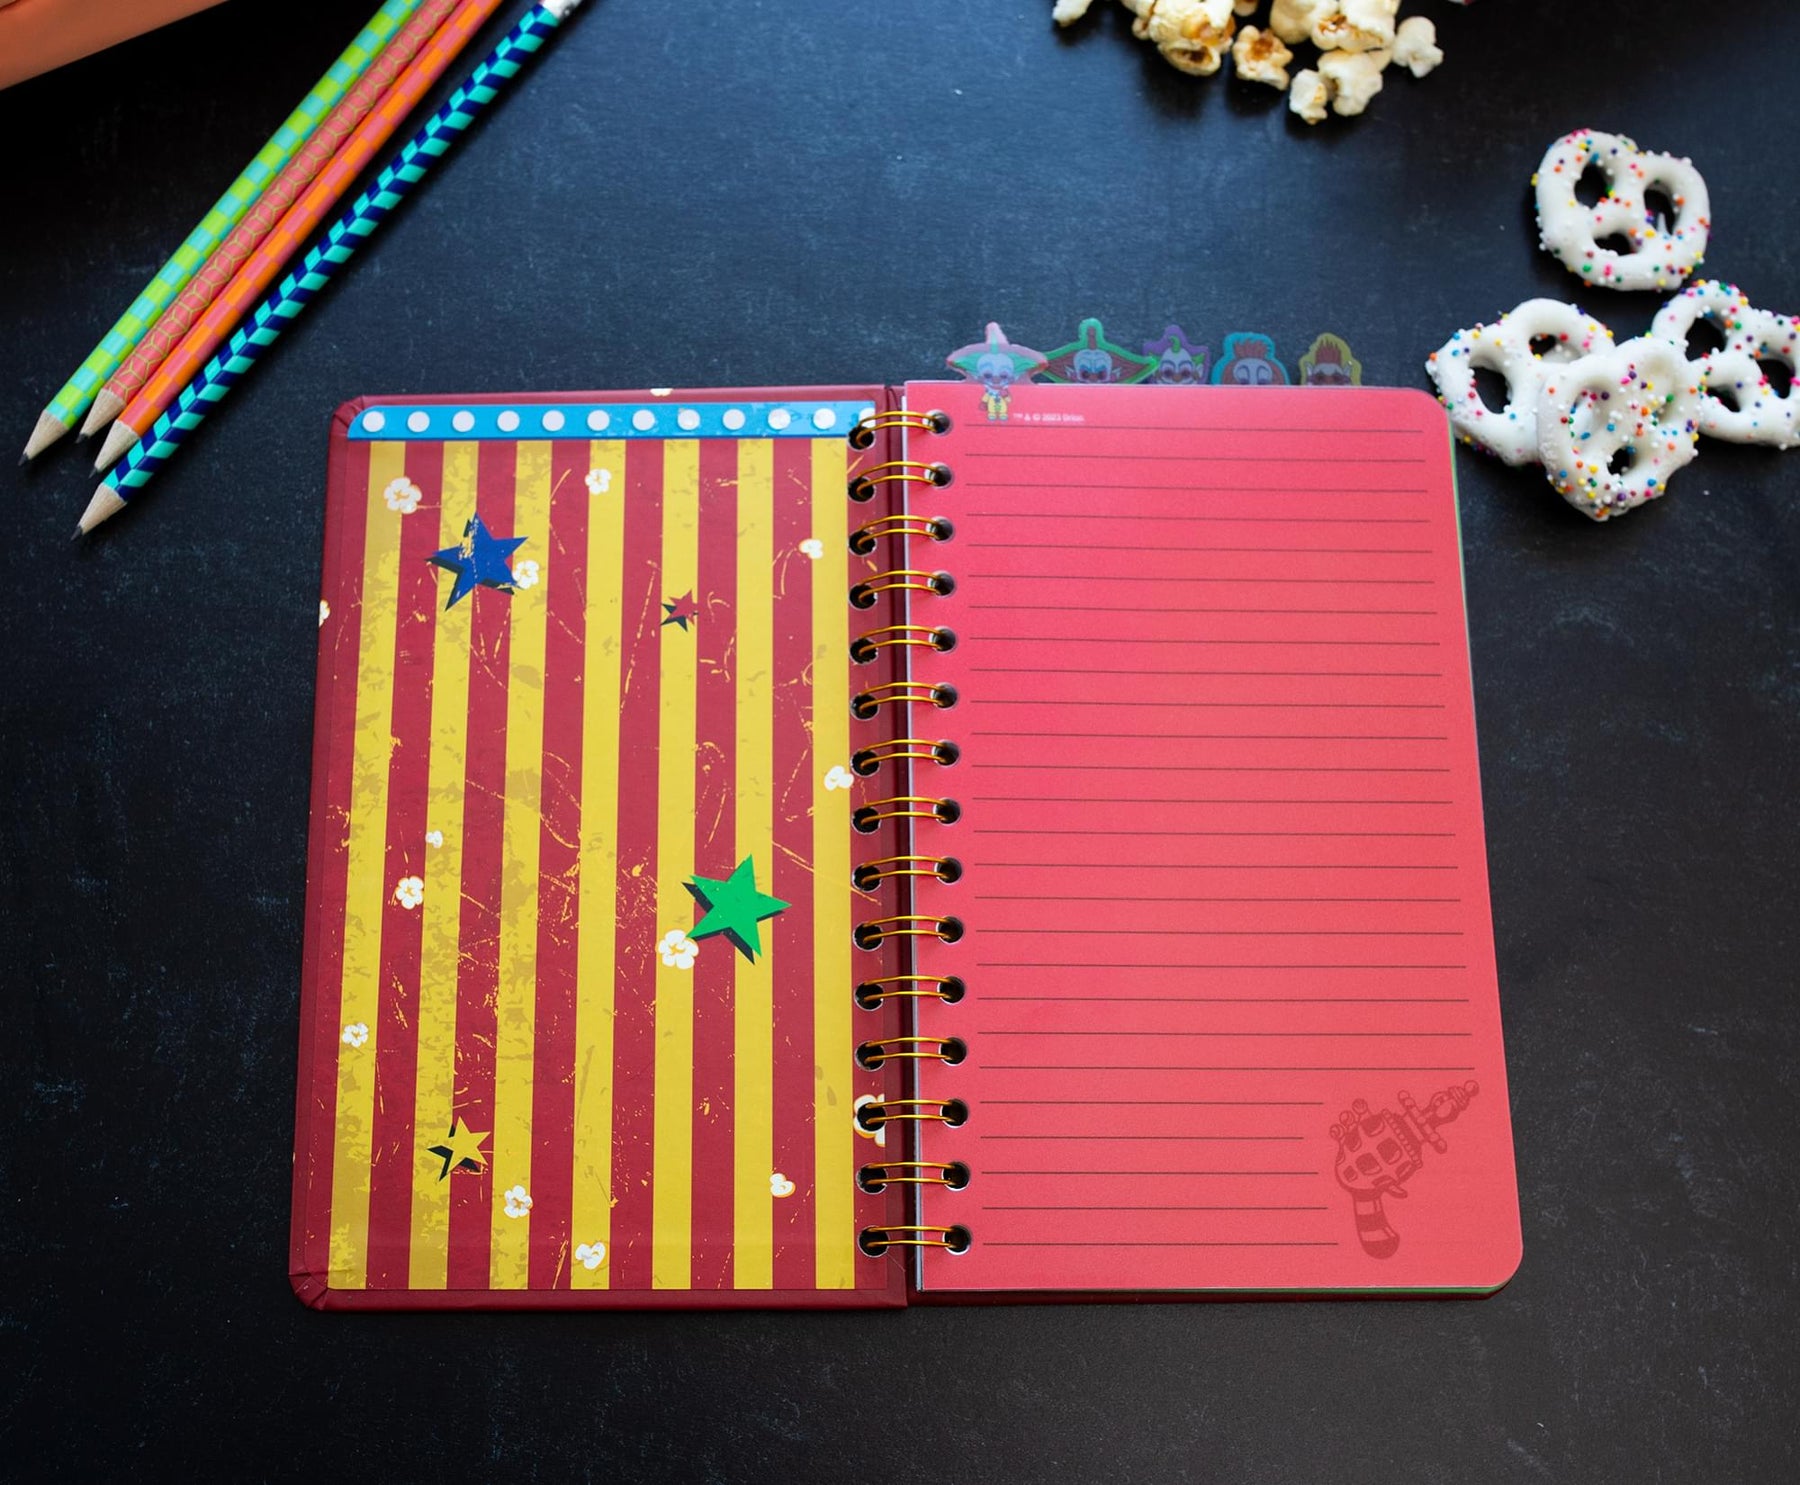 Killer Klowns From Outer Space 5-Tab Spiral Notebook With 75 Sheets